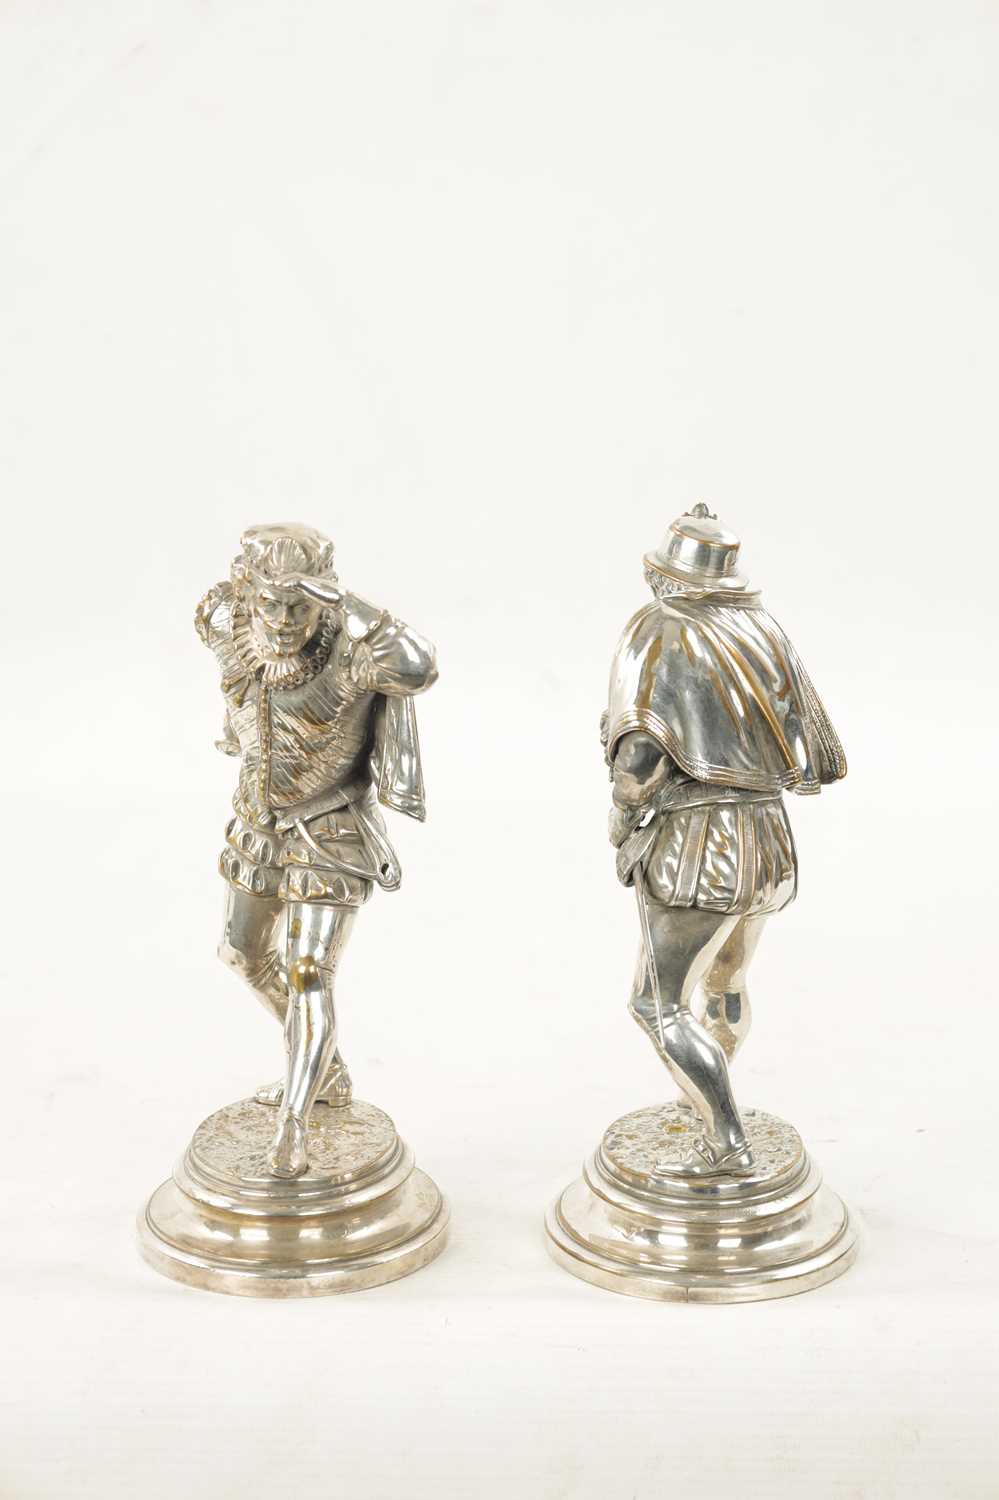 EMILE GUILLEMIN. A PAIR OF SILVERED BRONZE SCULPTURES DEPICTING CAVALIERS - Image 6 of 8